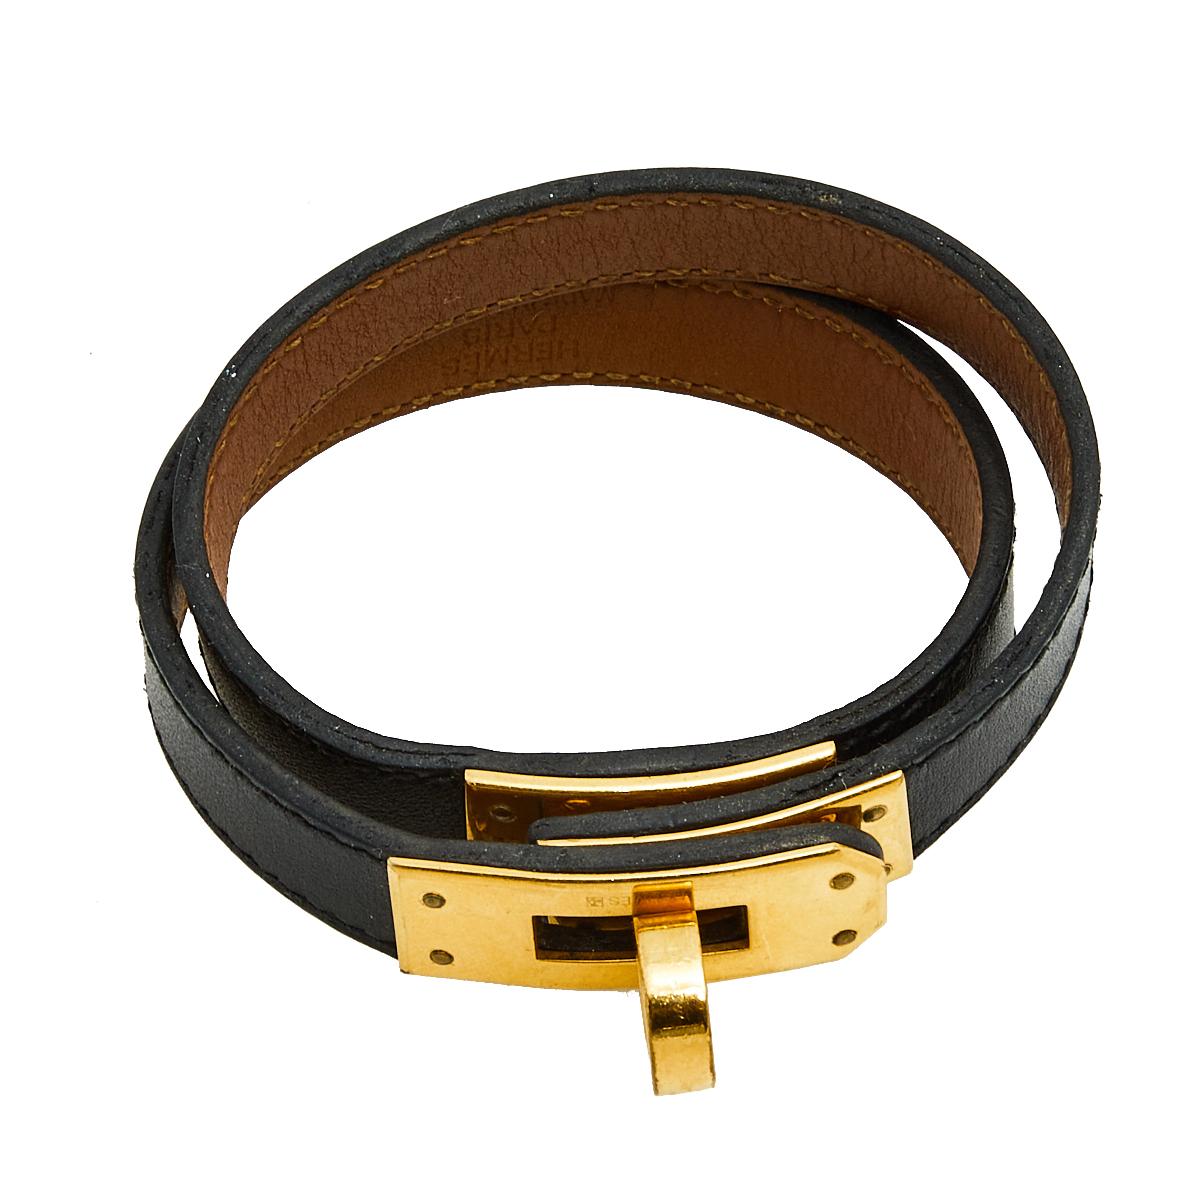 This Hermés Kelly Double Tour wrap bracelet is a chic accessory that can be paired with everything, from casuals to evening outfits. Made from leather, it is beautified with a Kelly twist closure in gold-plated metal. The bracelet has a long strap